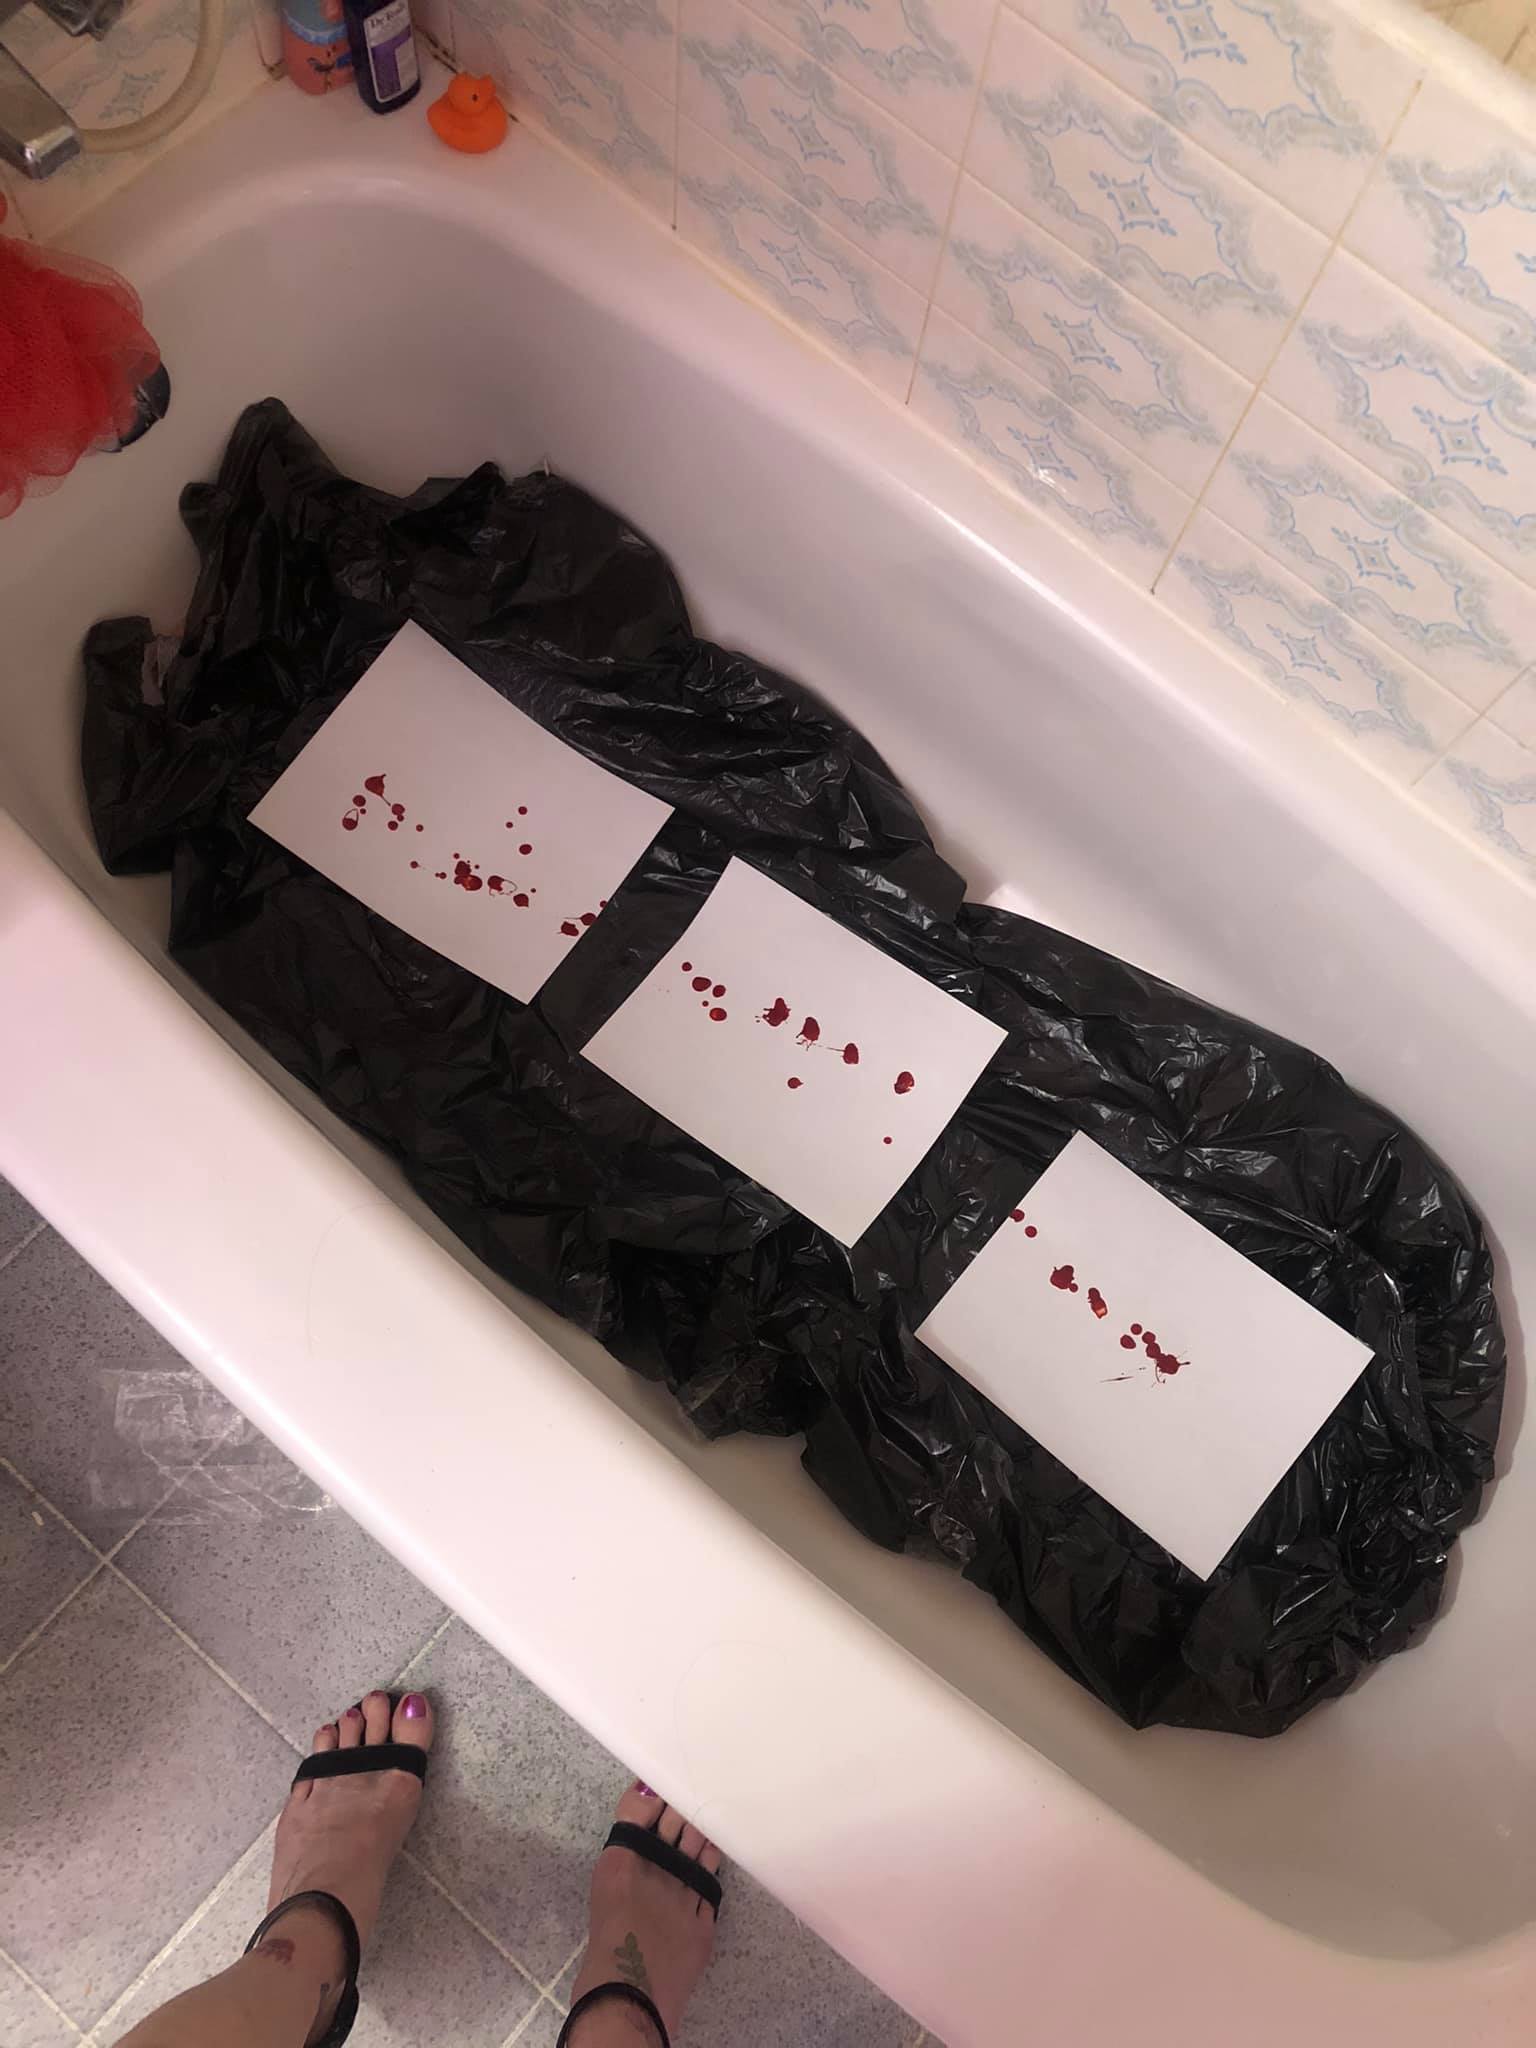 Three more canvases with droplets of blood, just kinda run back and forth over the pages, as though letting it drip from the staff and just kinda moving it back and forth. Her feet are seen at the base of the tub.